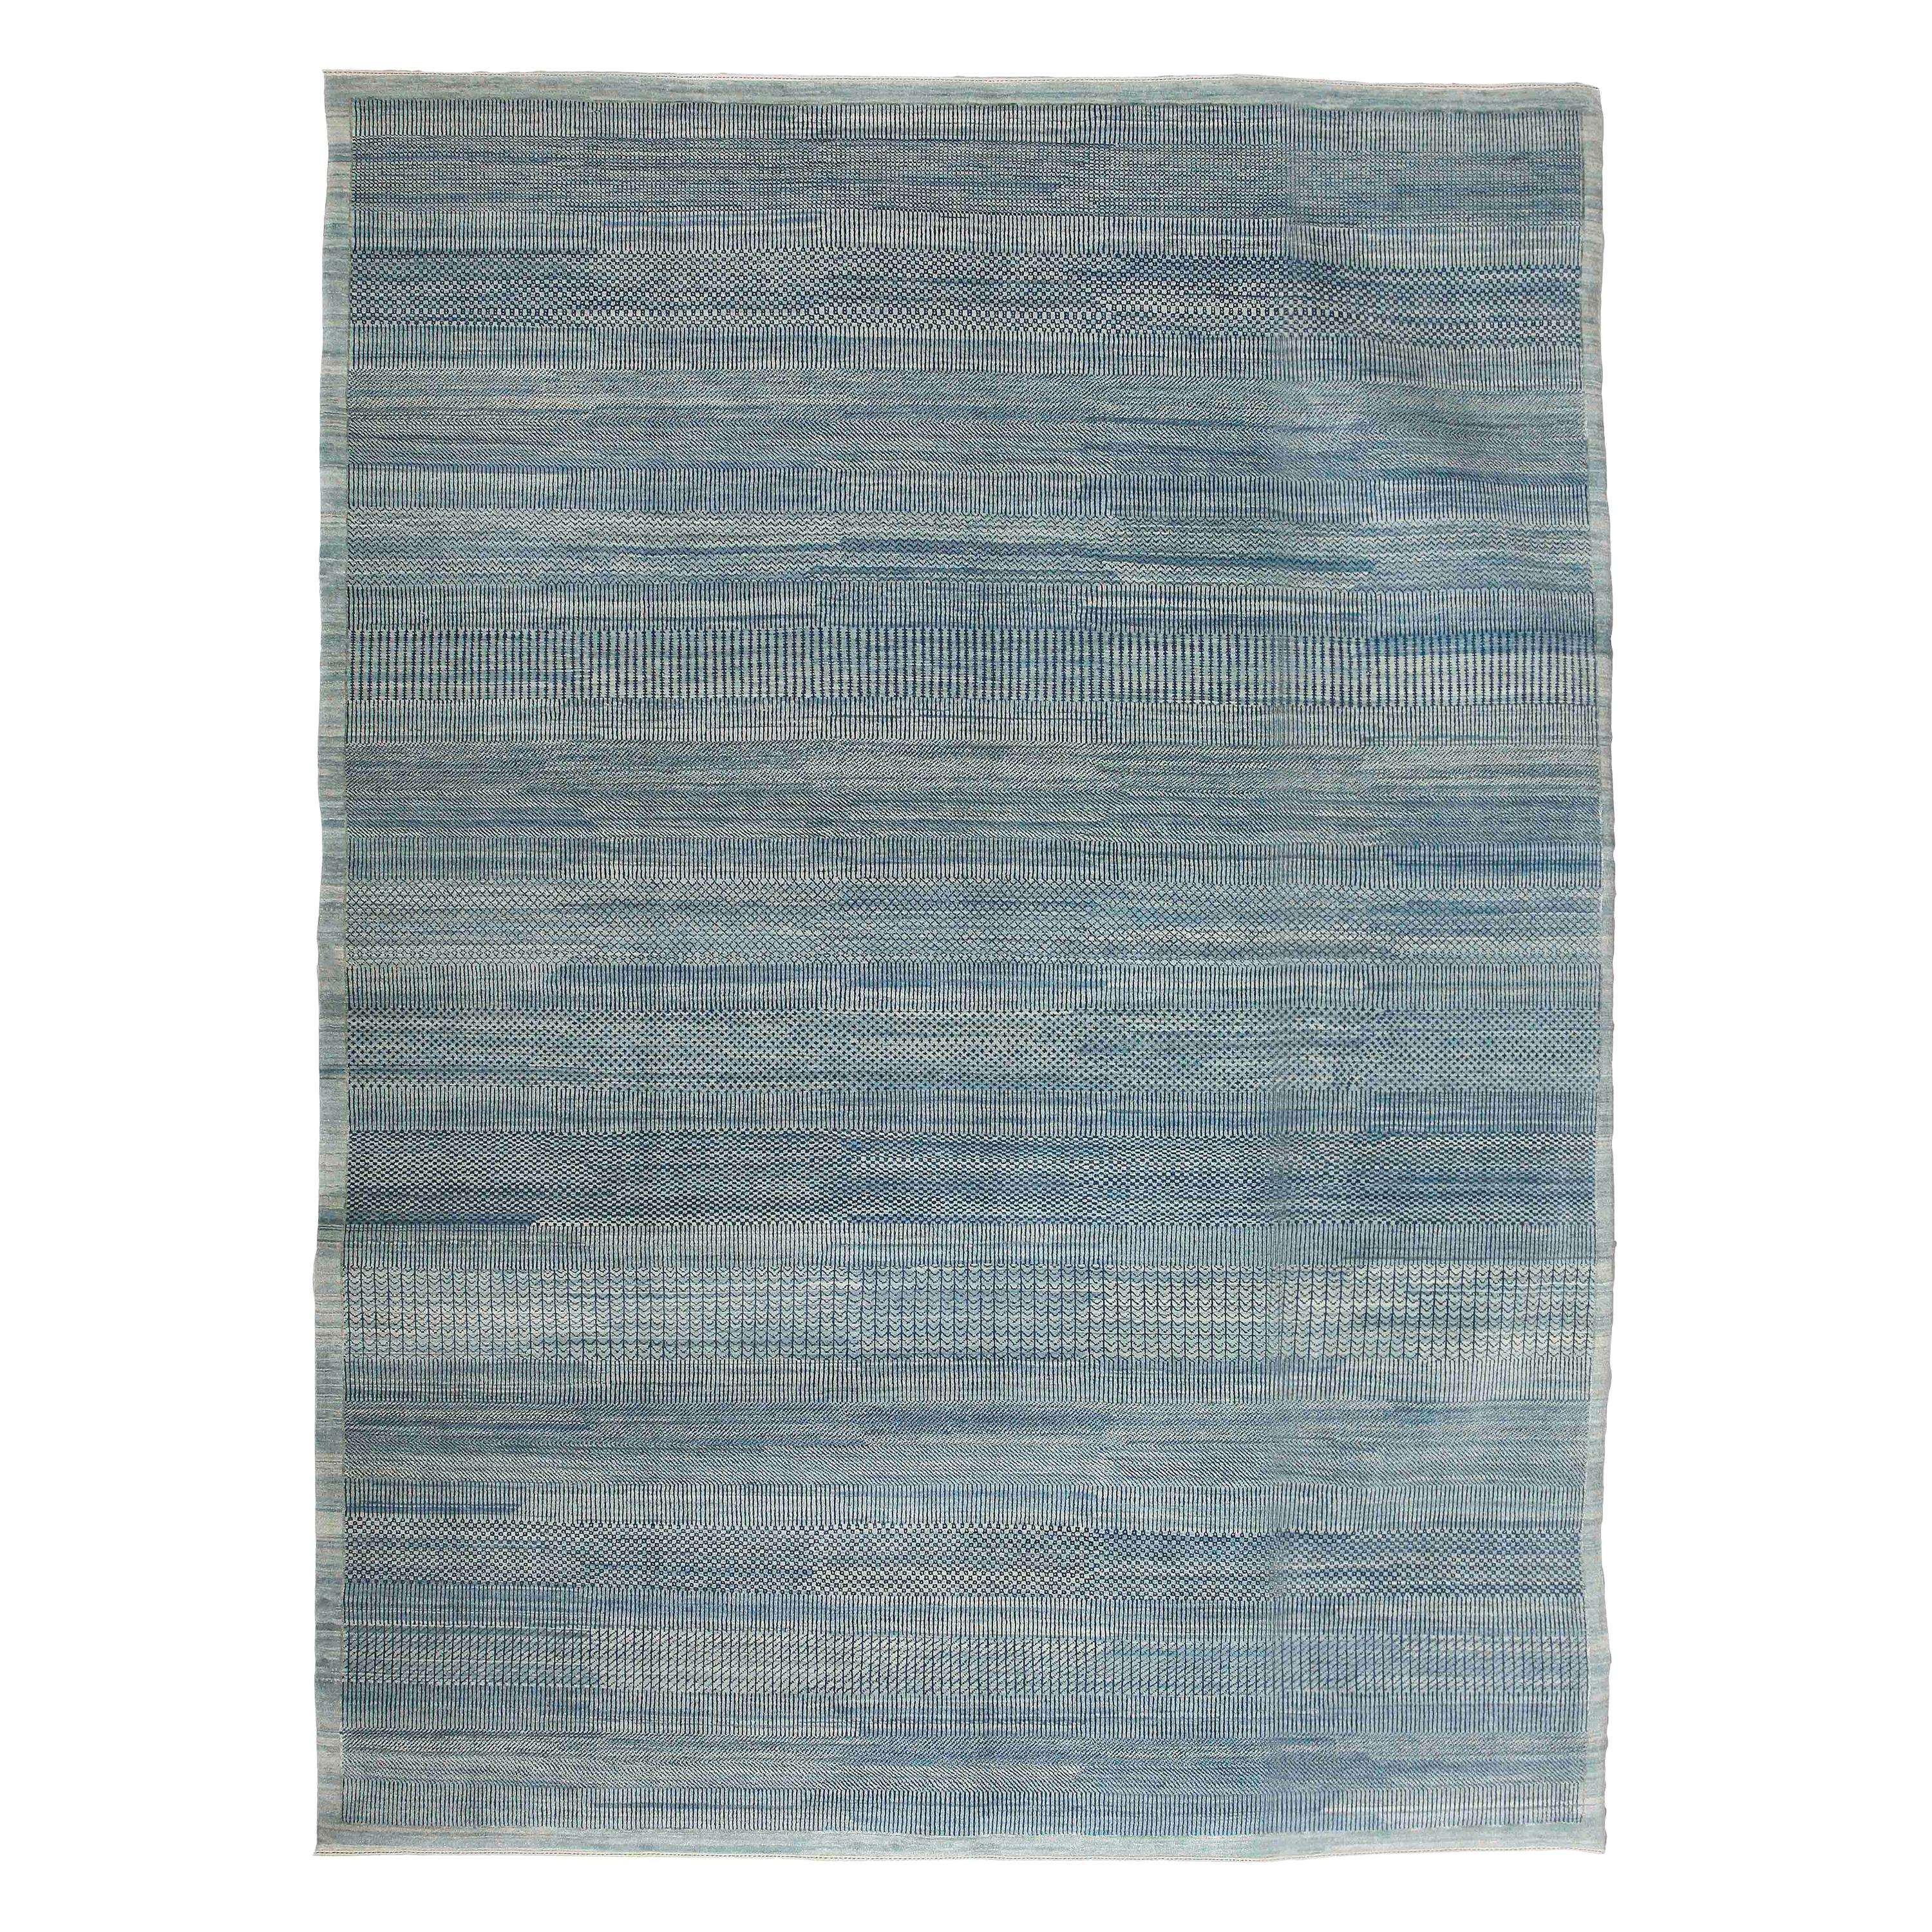 Wool Contemporary Persian Rug, Blue, 9’ x 12’